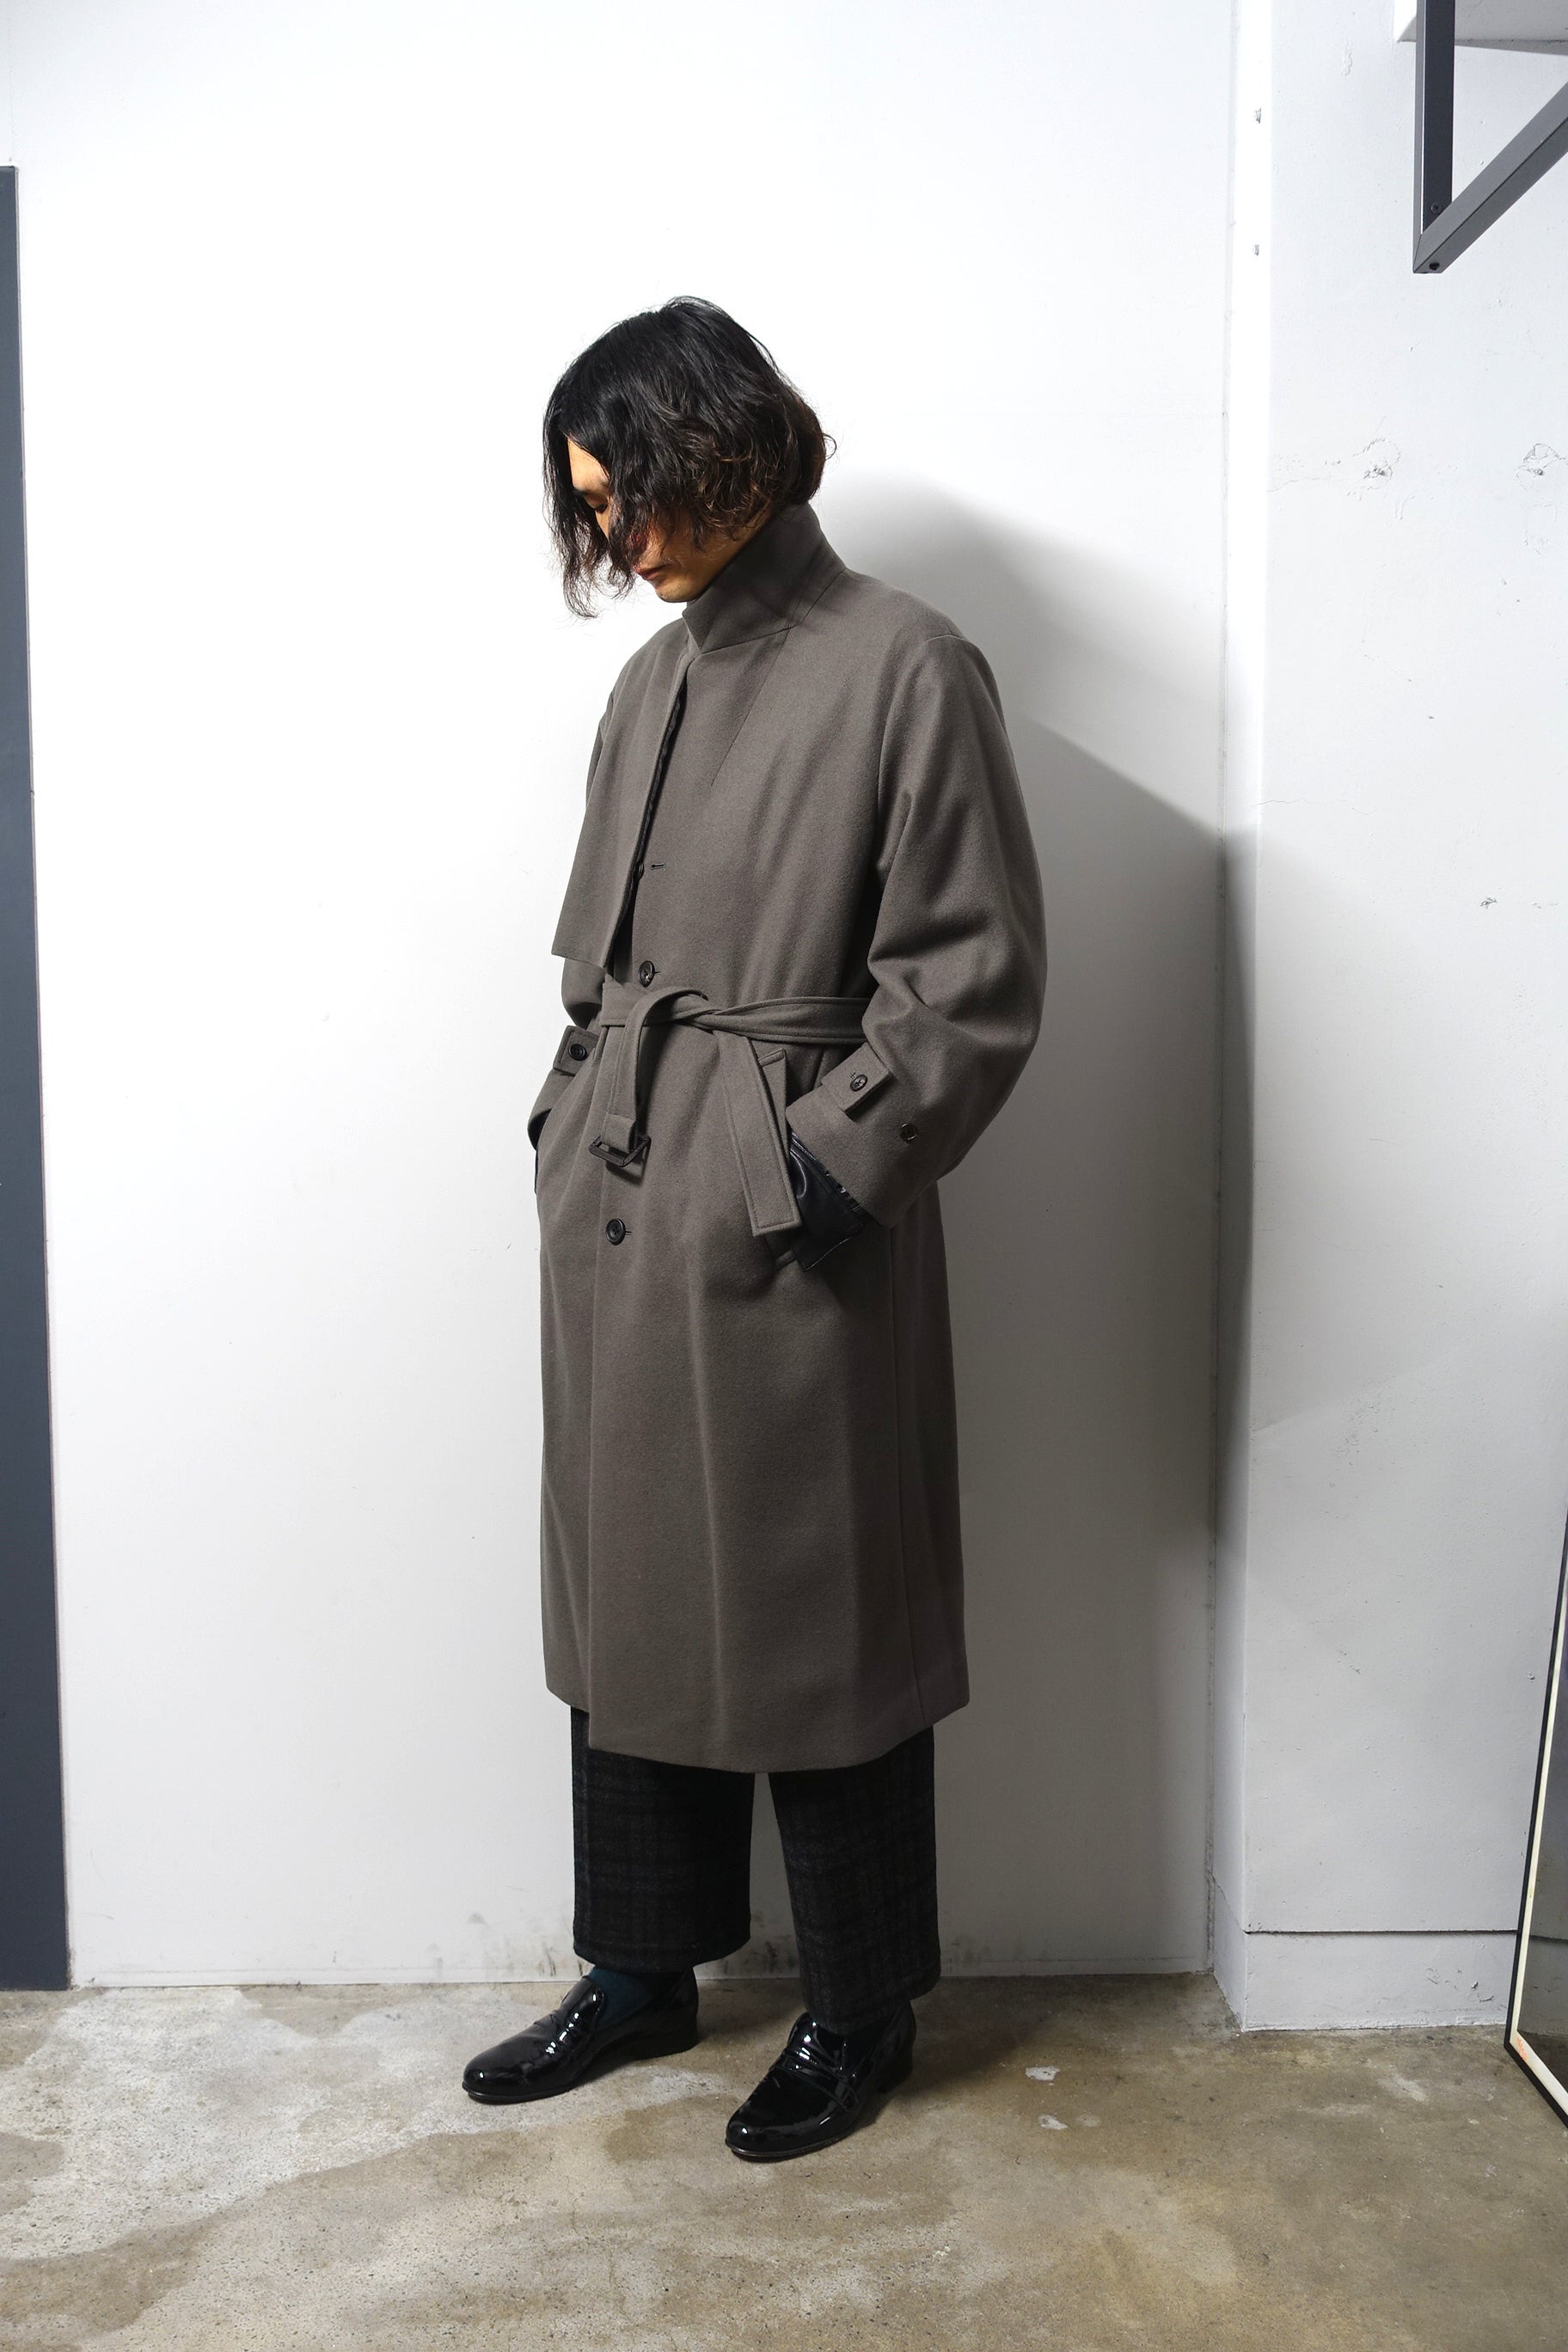 stein(シュタイン)/LAY CHESTER COAT/G.Taupe 通販 取り扱い-CONCRETE 